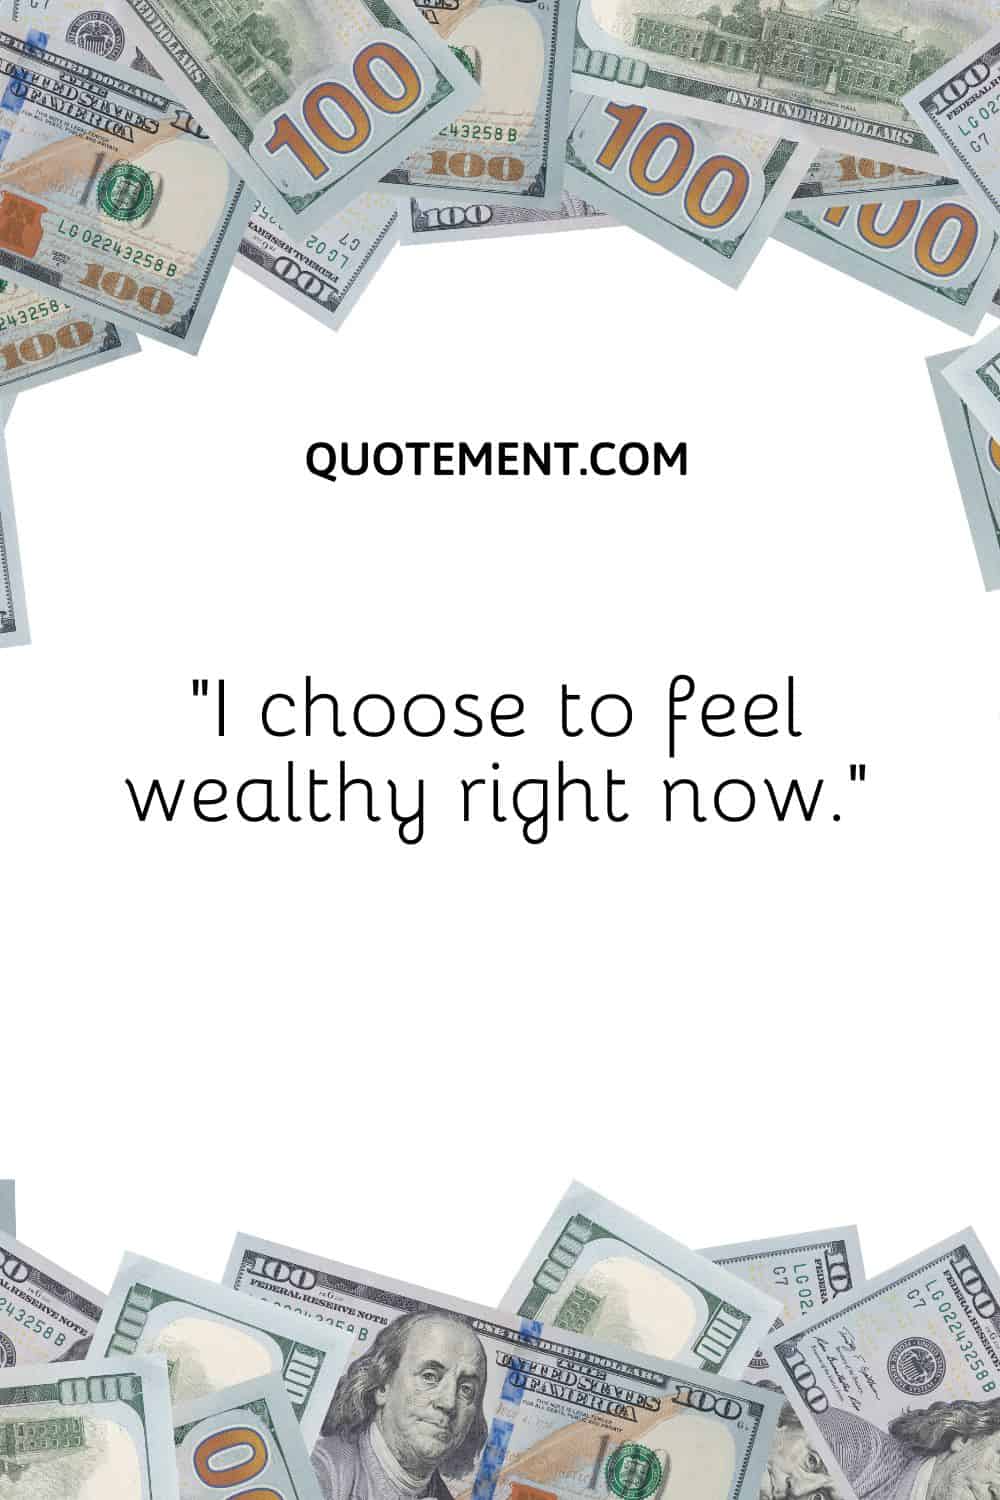 “I choose to feel wealthy right now.”